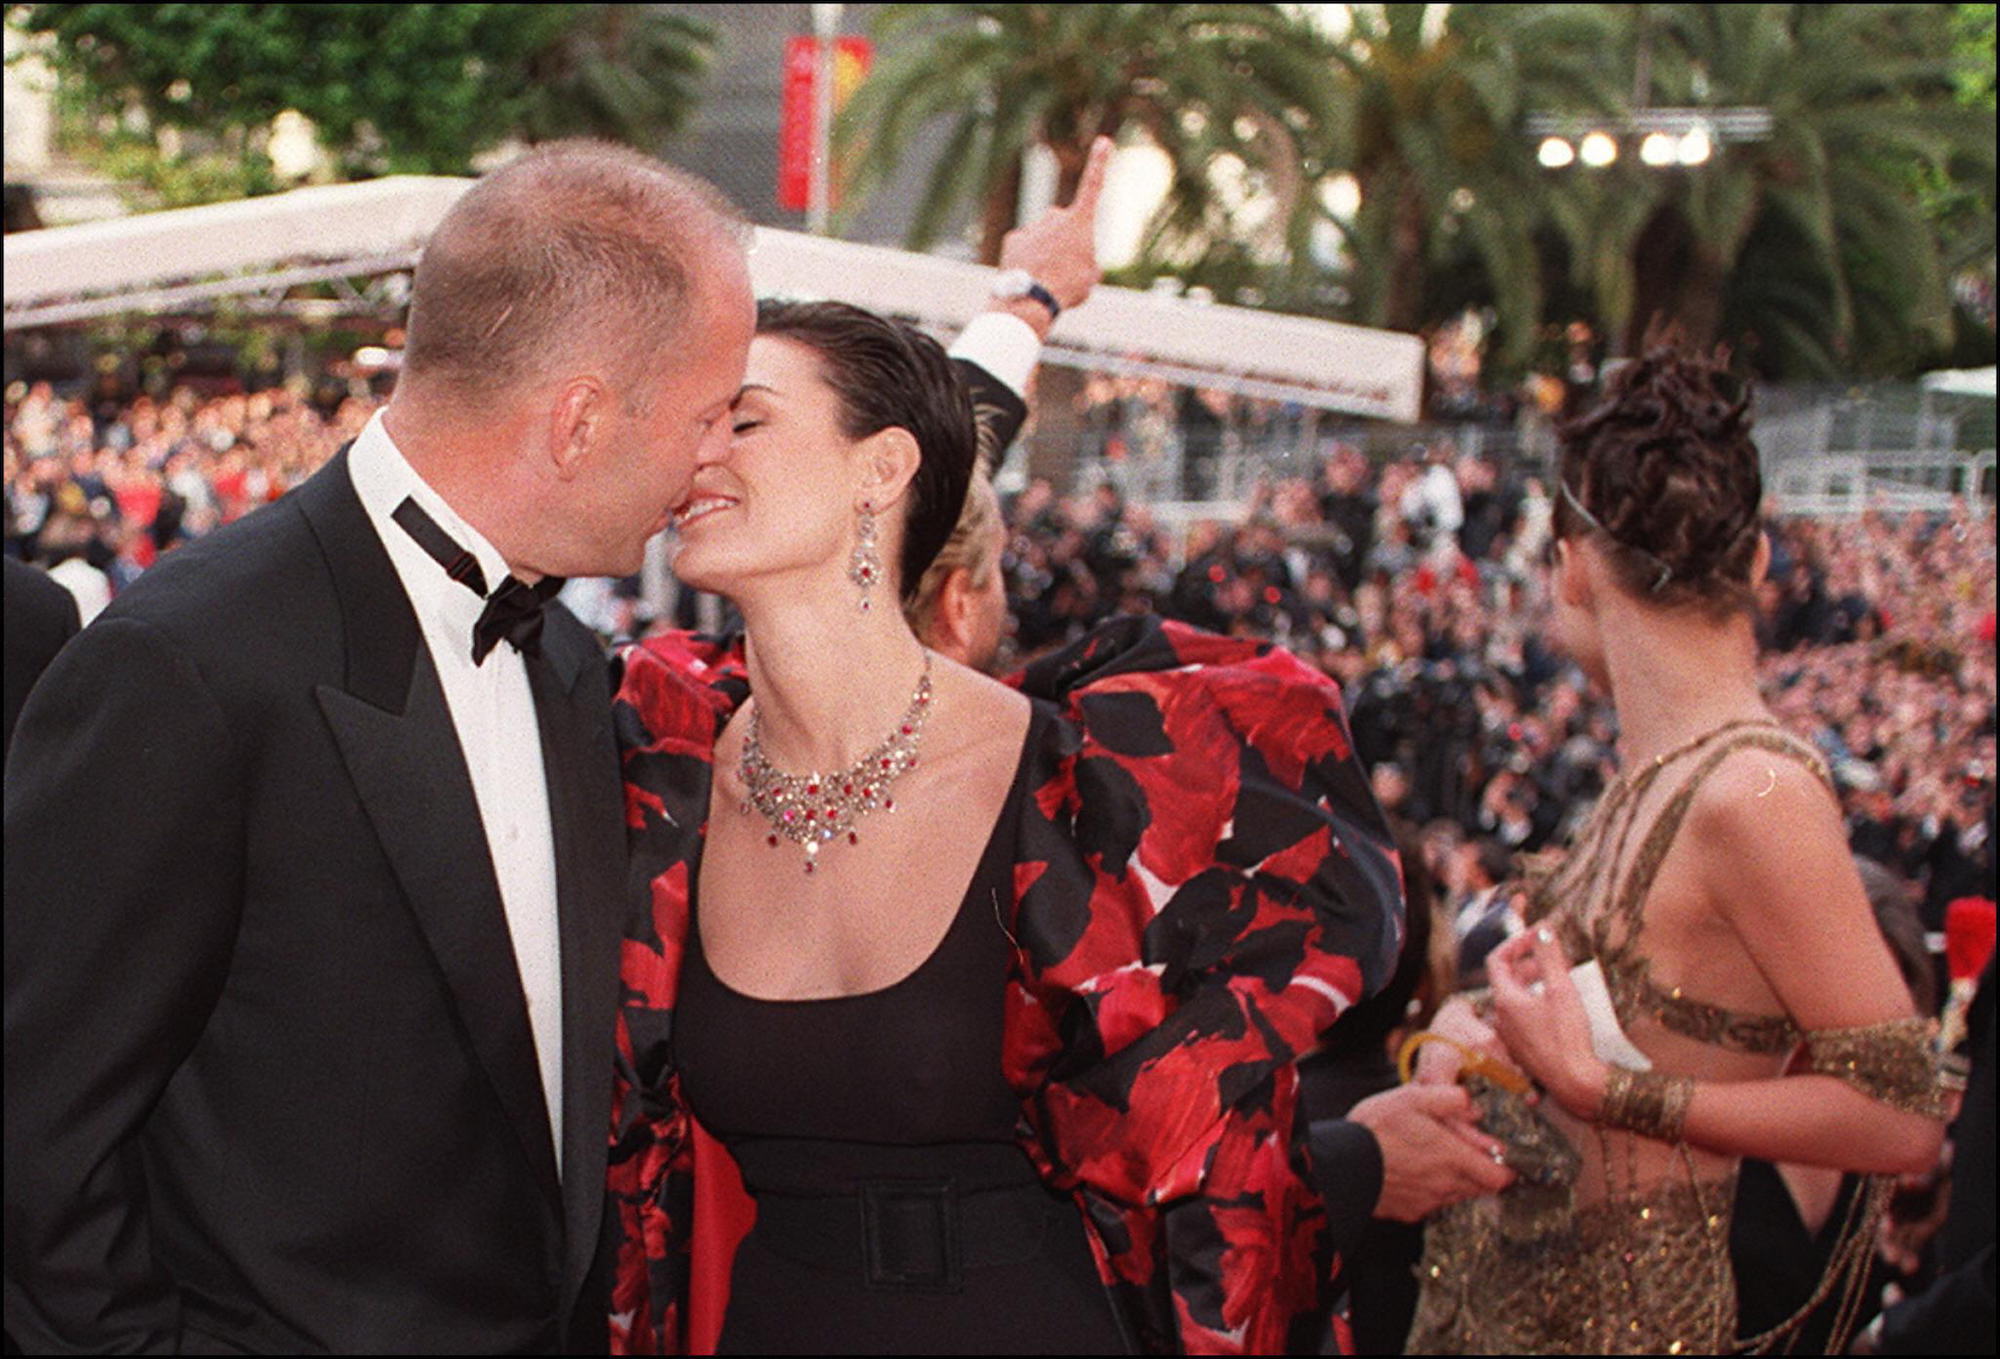 Bruce Willis and Demi Moore kiss at the top of the steps of the Palais des festivals